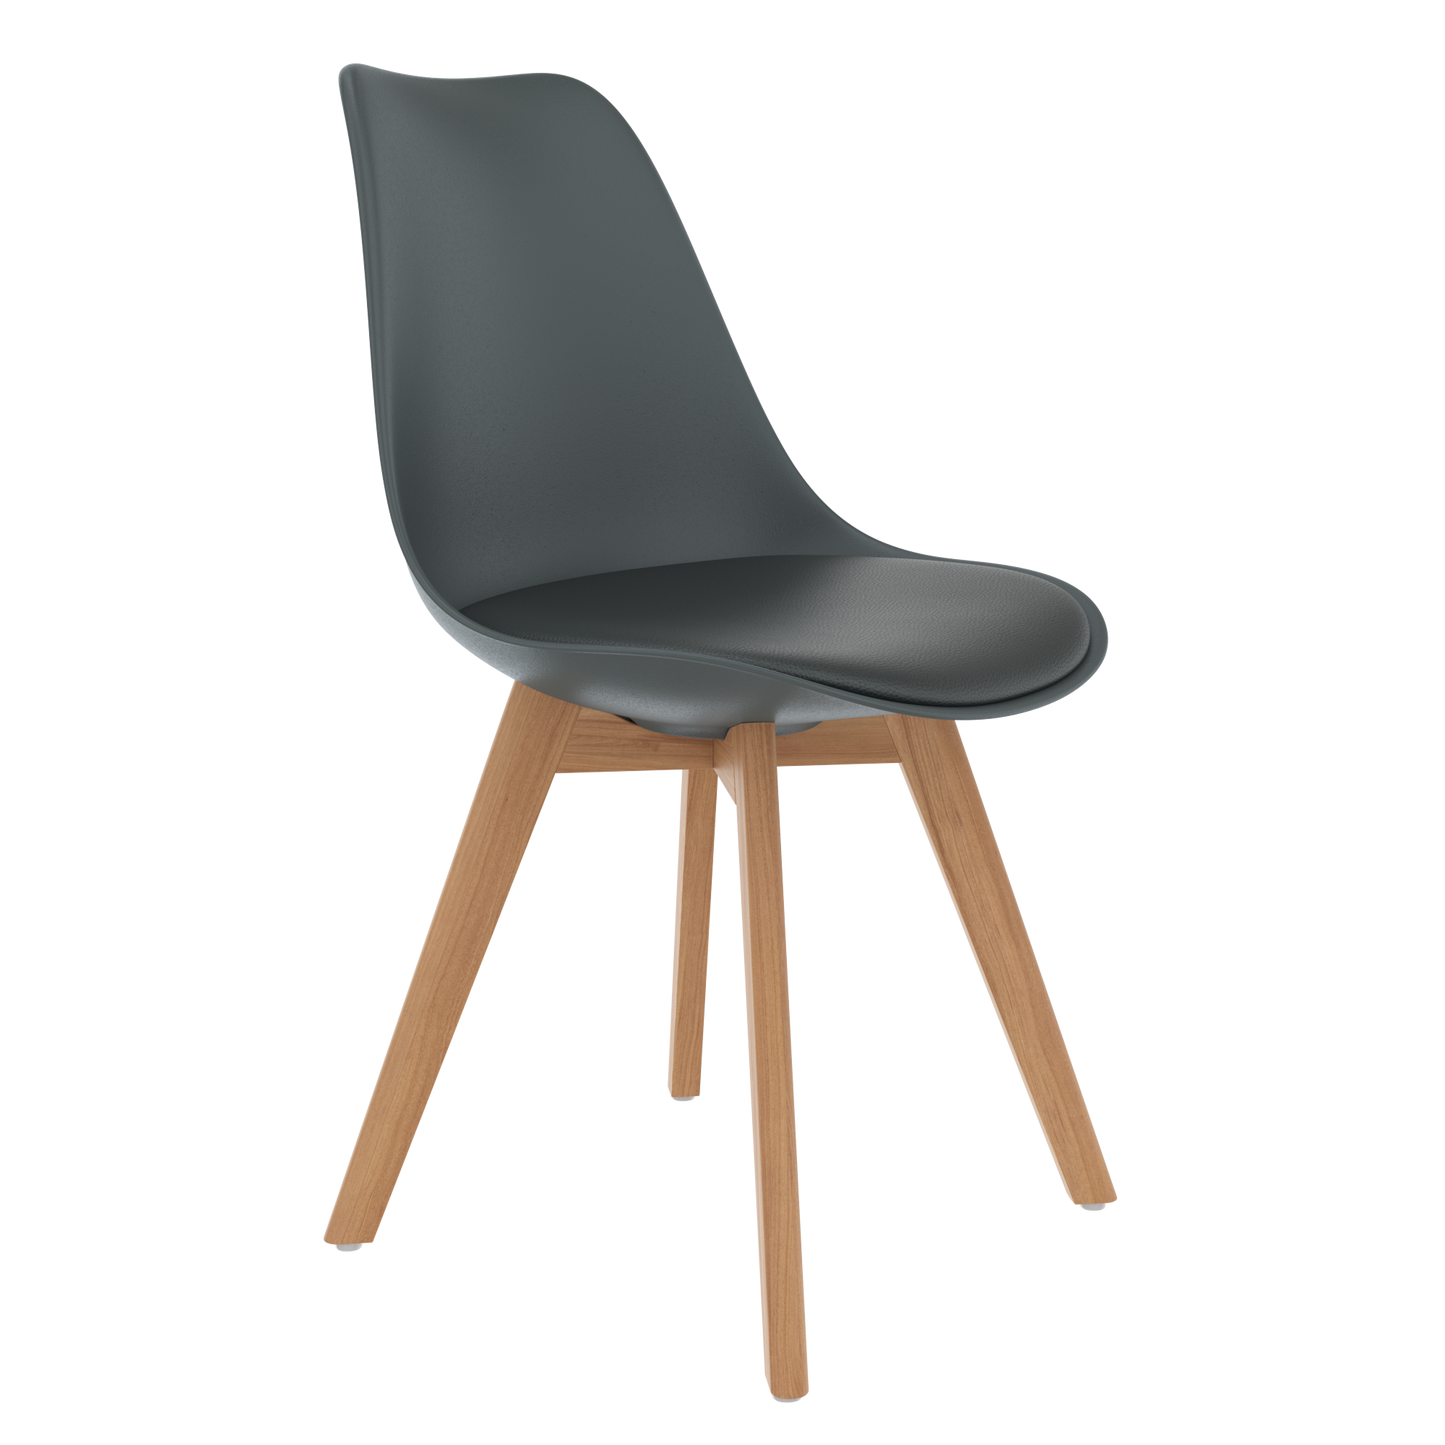 Chotto - Ando Dining Chairs - Grey ( set of 6)